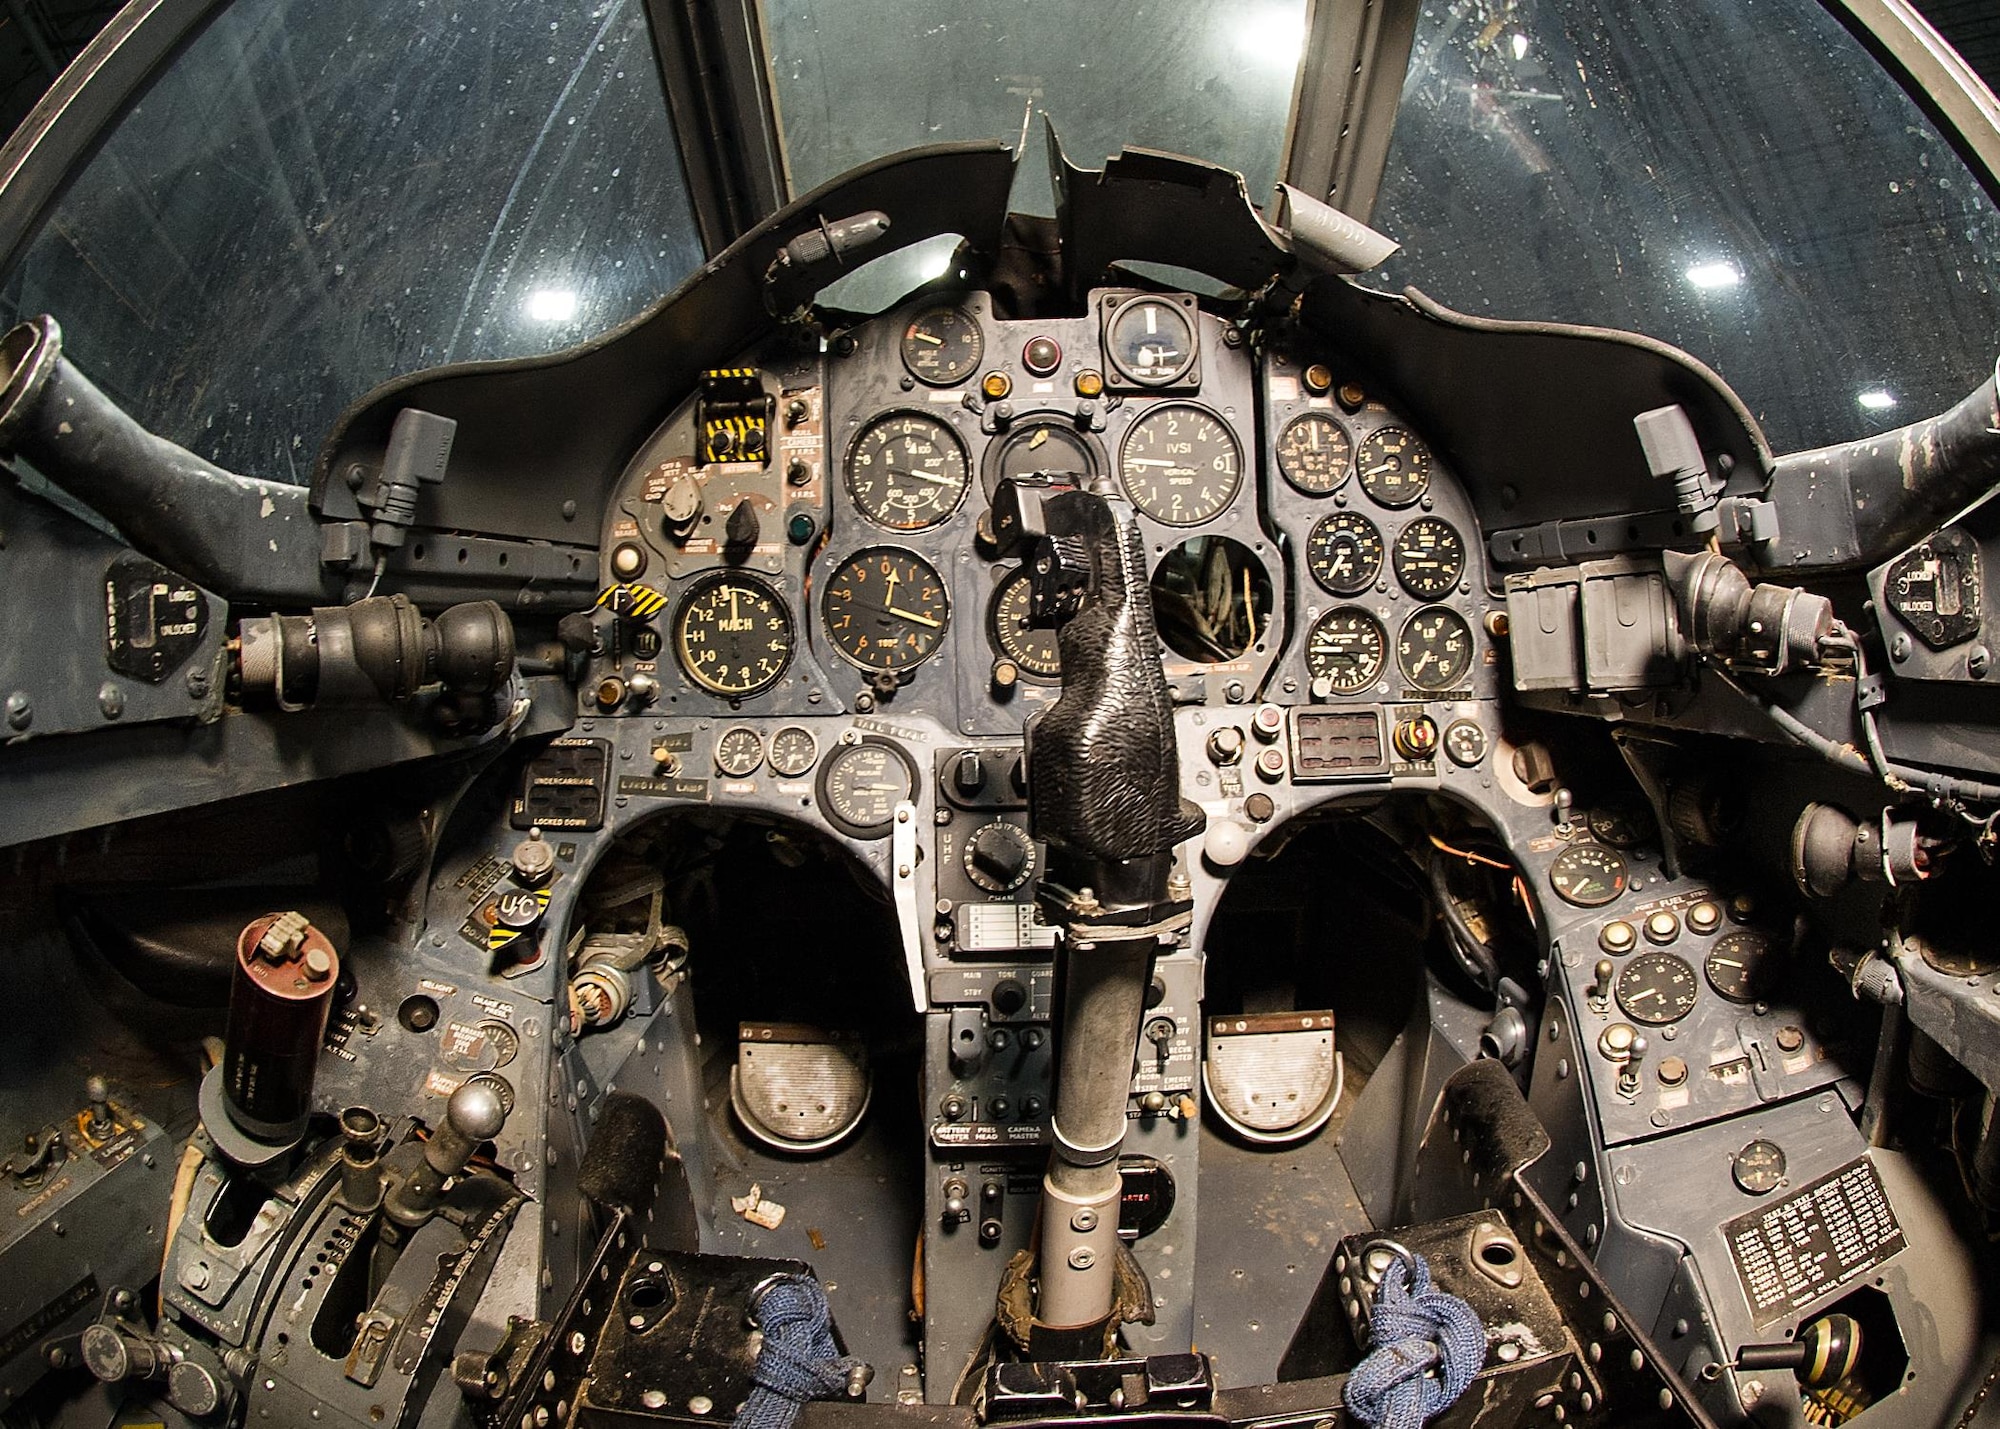 DAYTON, Ohio -- Hawker Siddeley XV-6A Kestrel cockpit view at the National Museum of the United States Air Force. (U.S. Air Force photo)